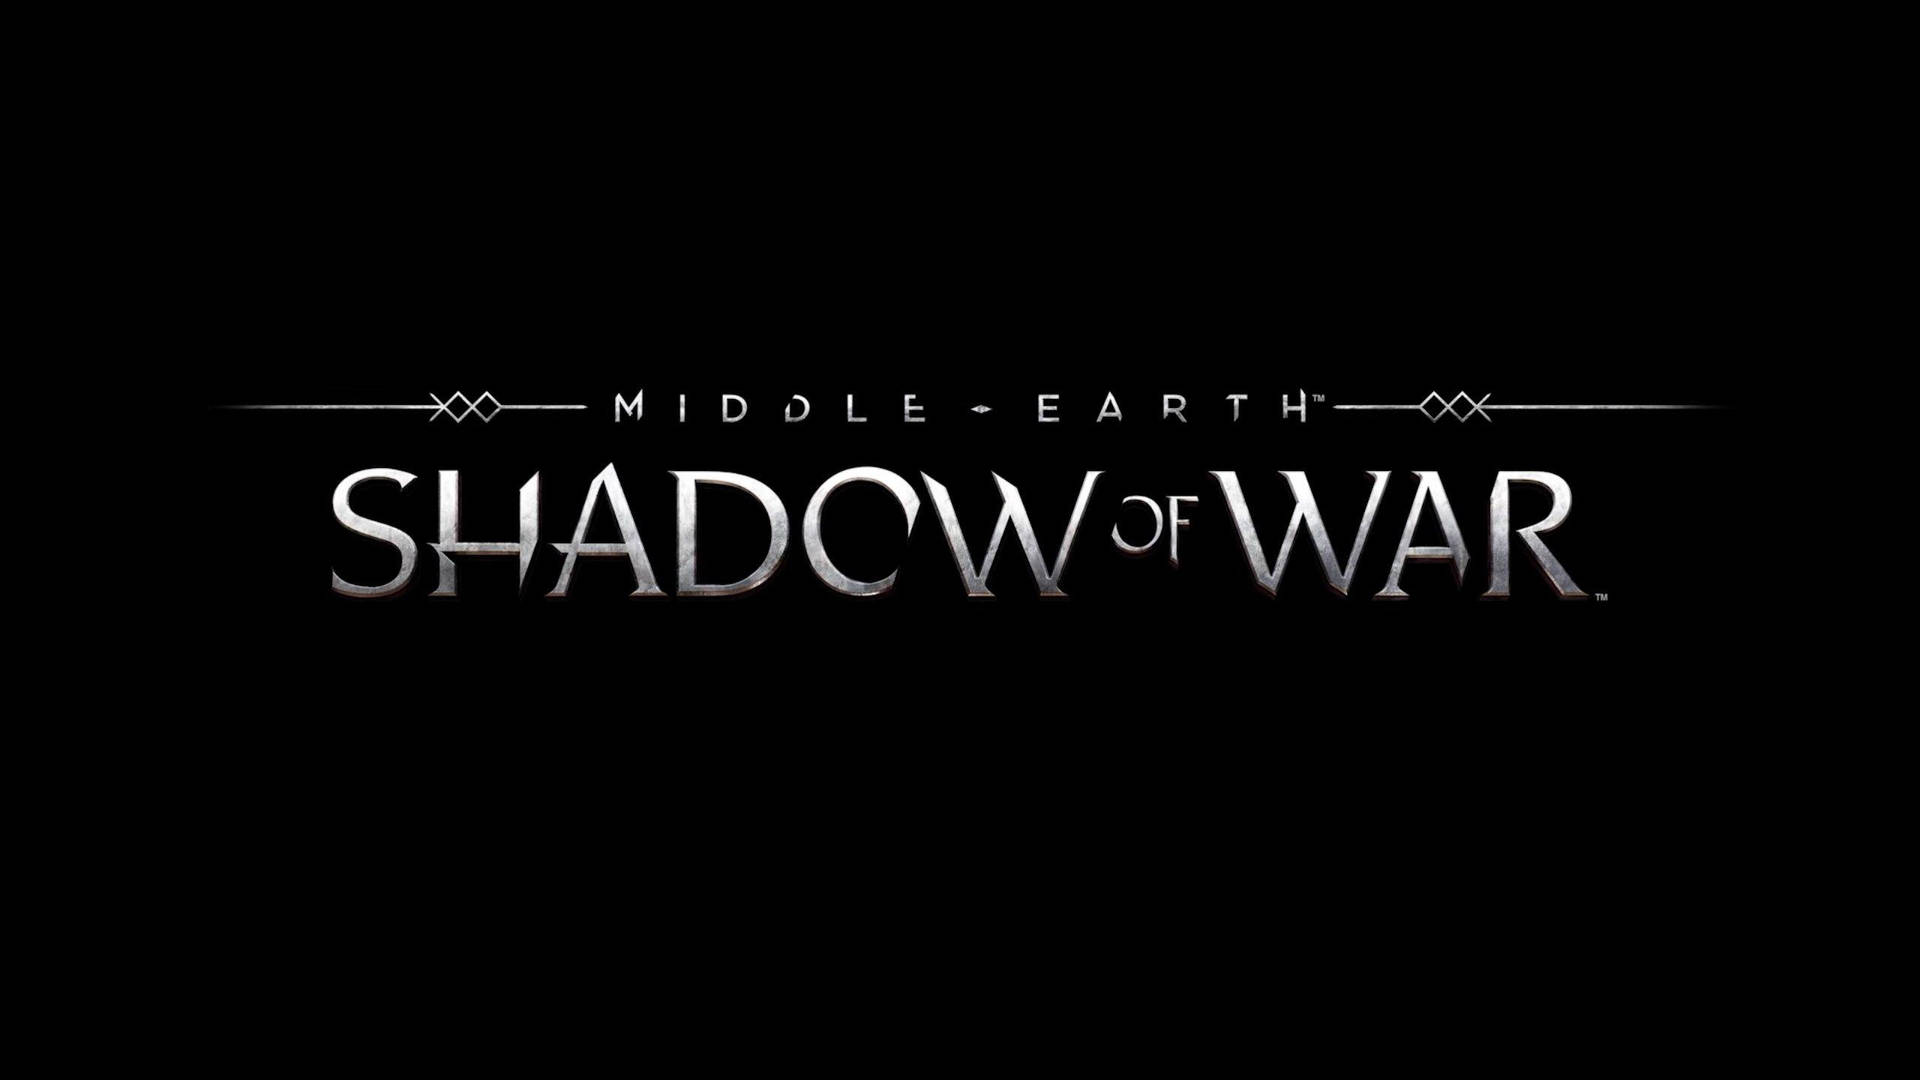 Middle Earth Shadow Of War Black Aesthetic Background